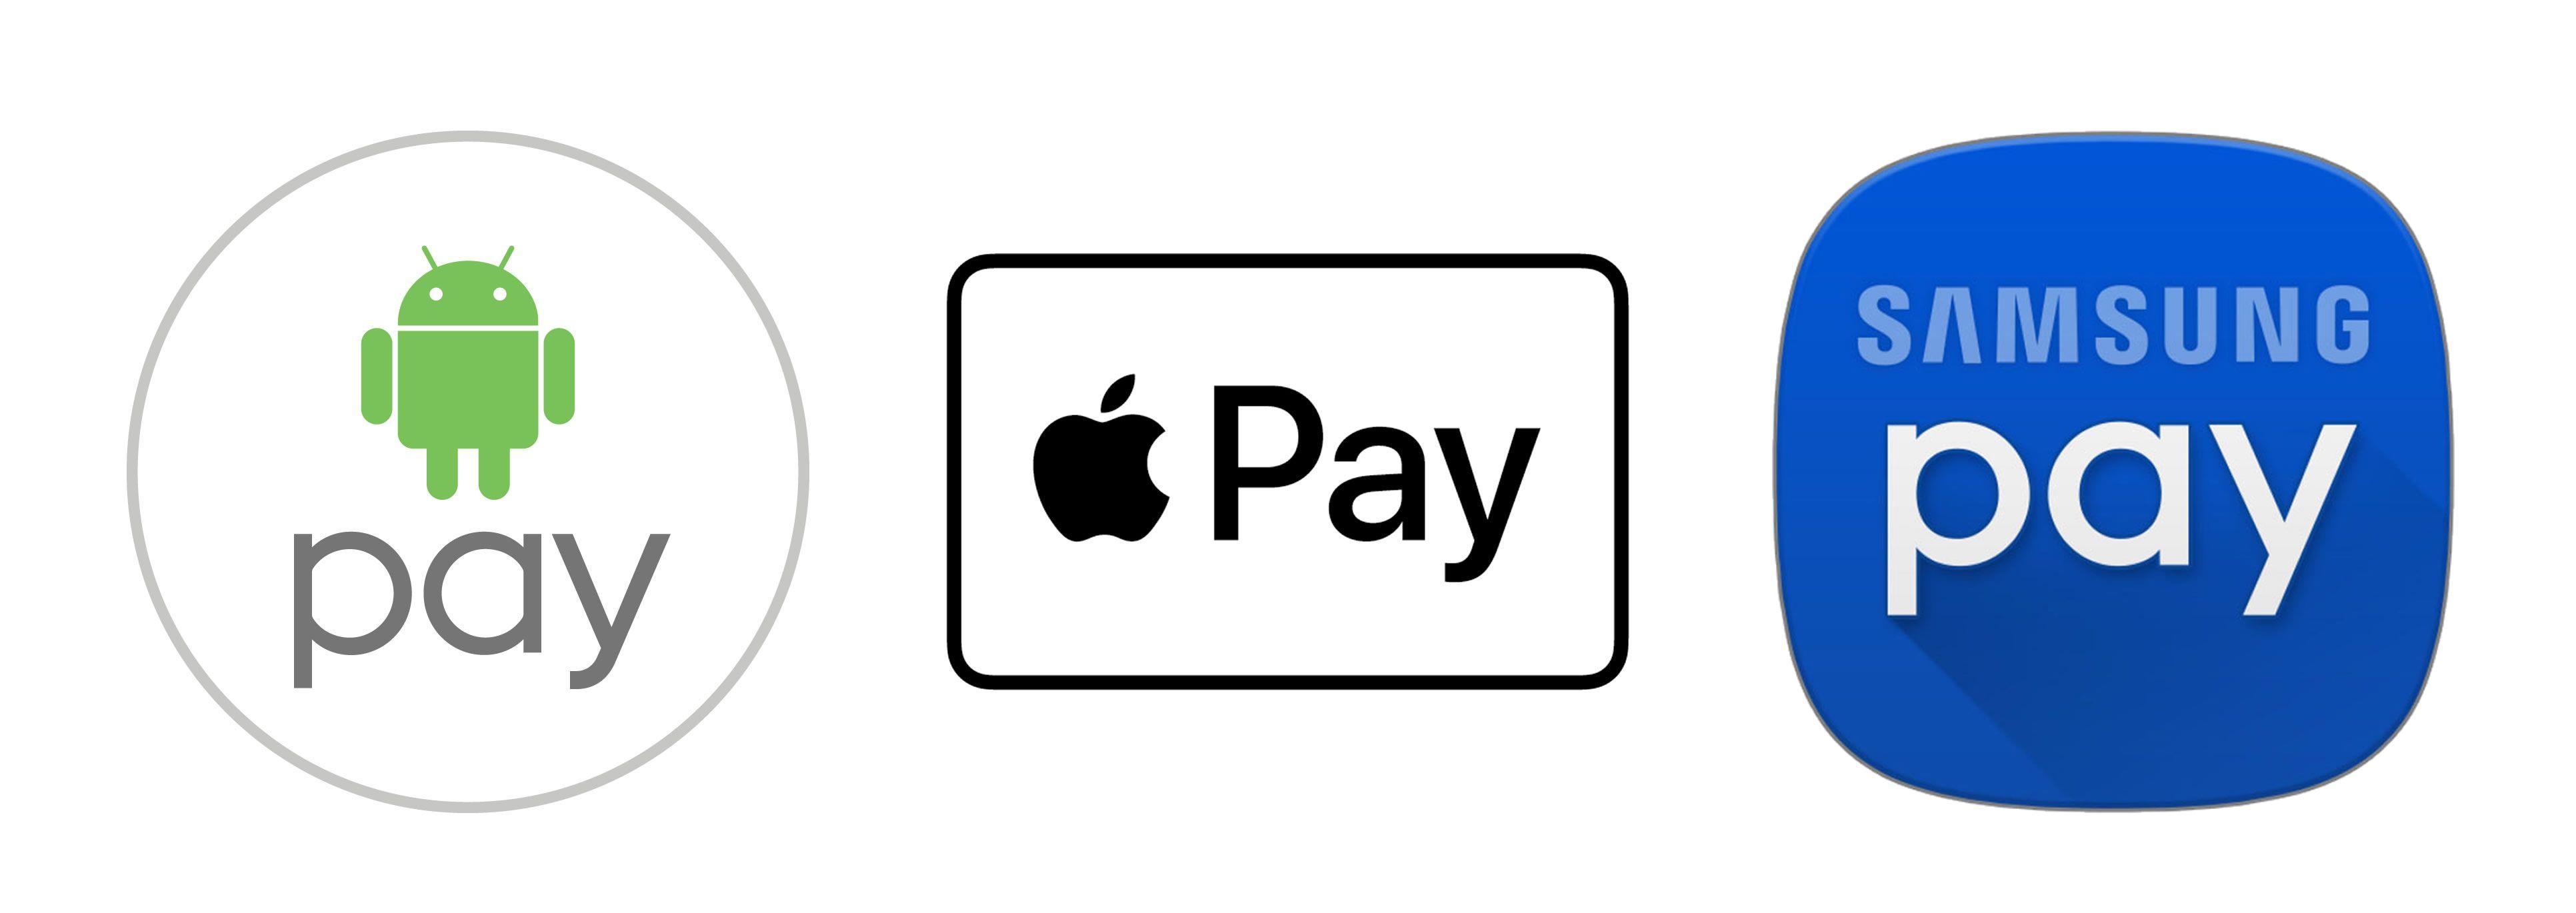 Apple or Android Pay Logo - Android pay Logos